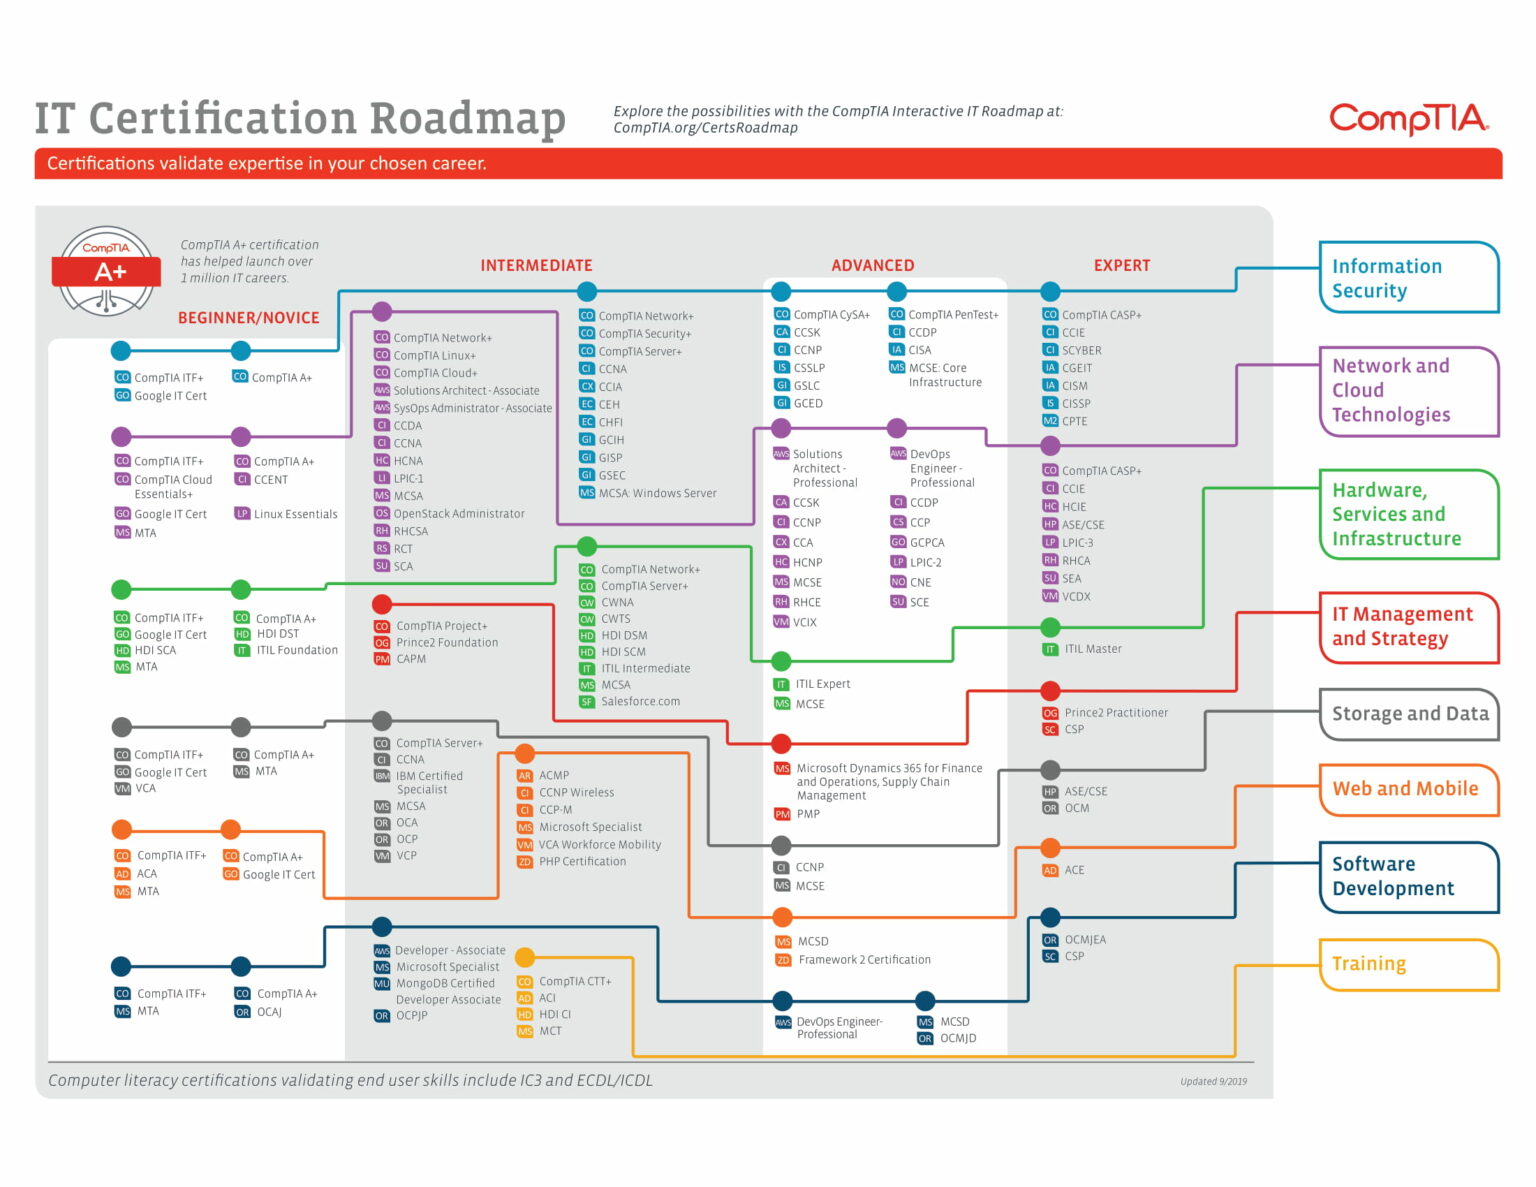 It Certification Roadmap By Comptia Full Guide To Your It Guide | Hot ...